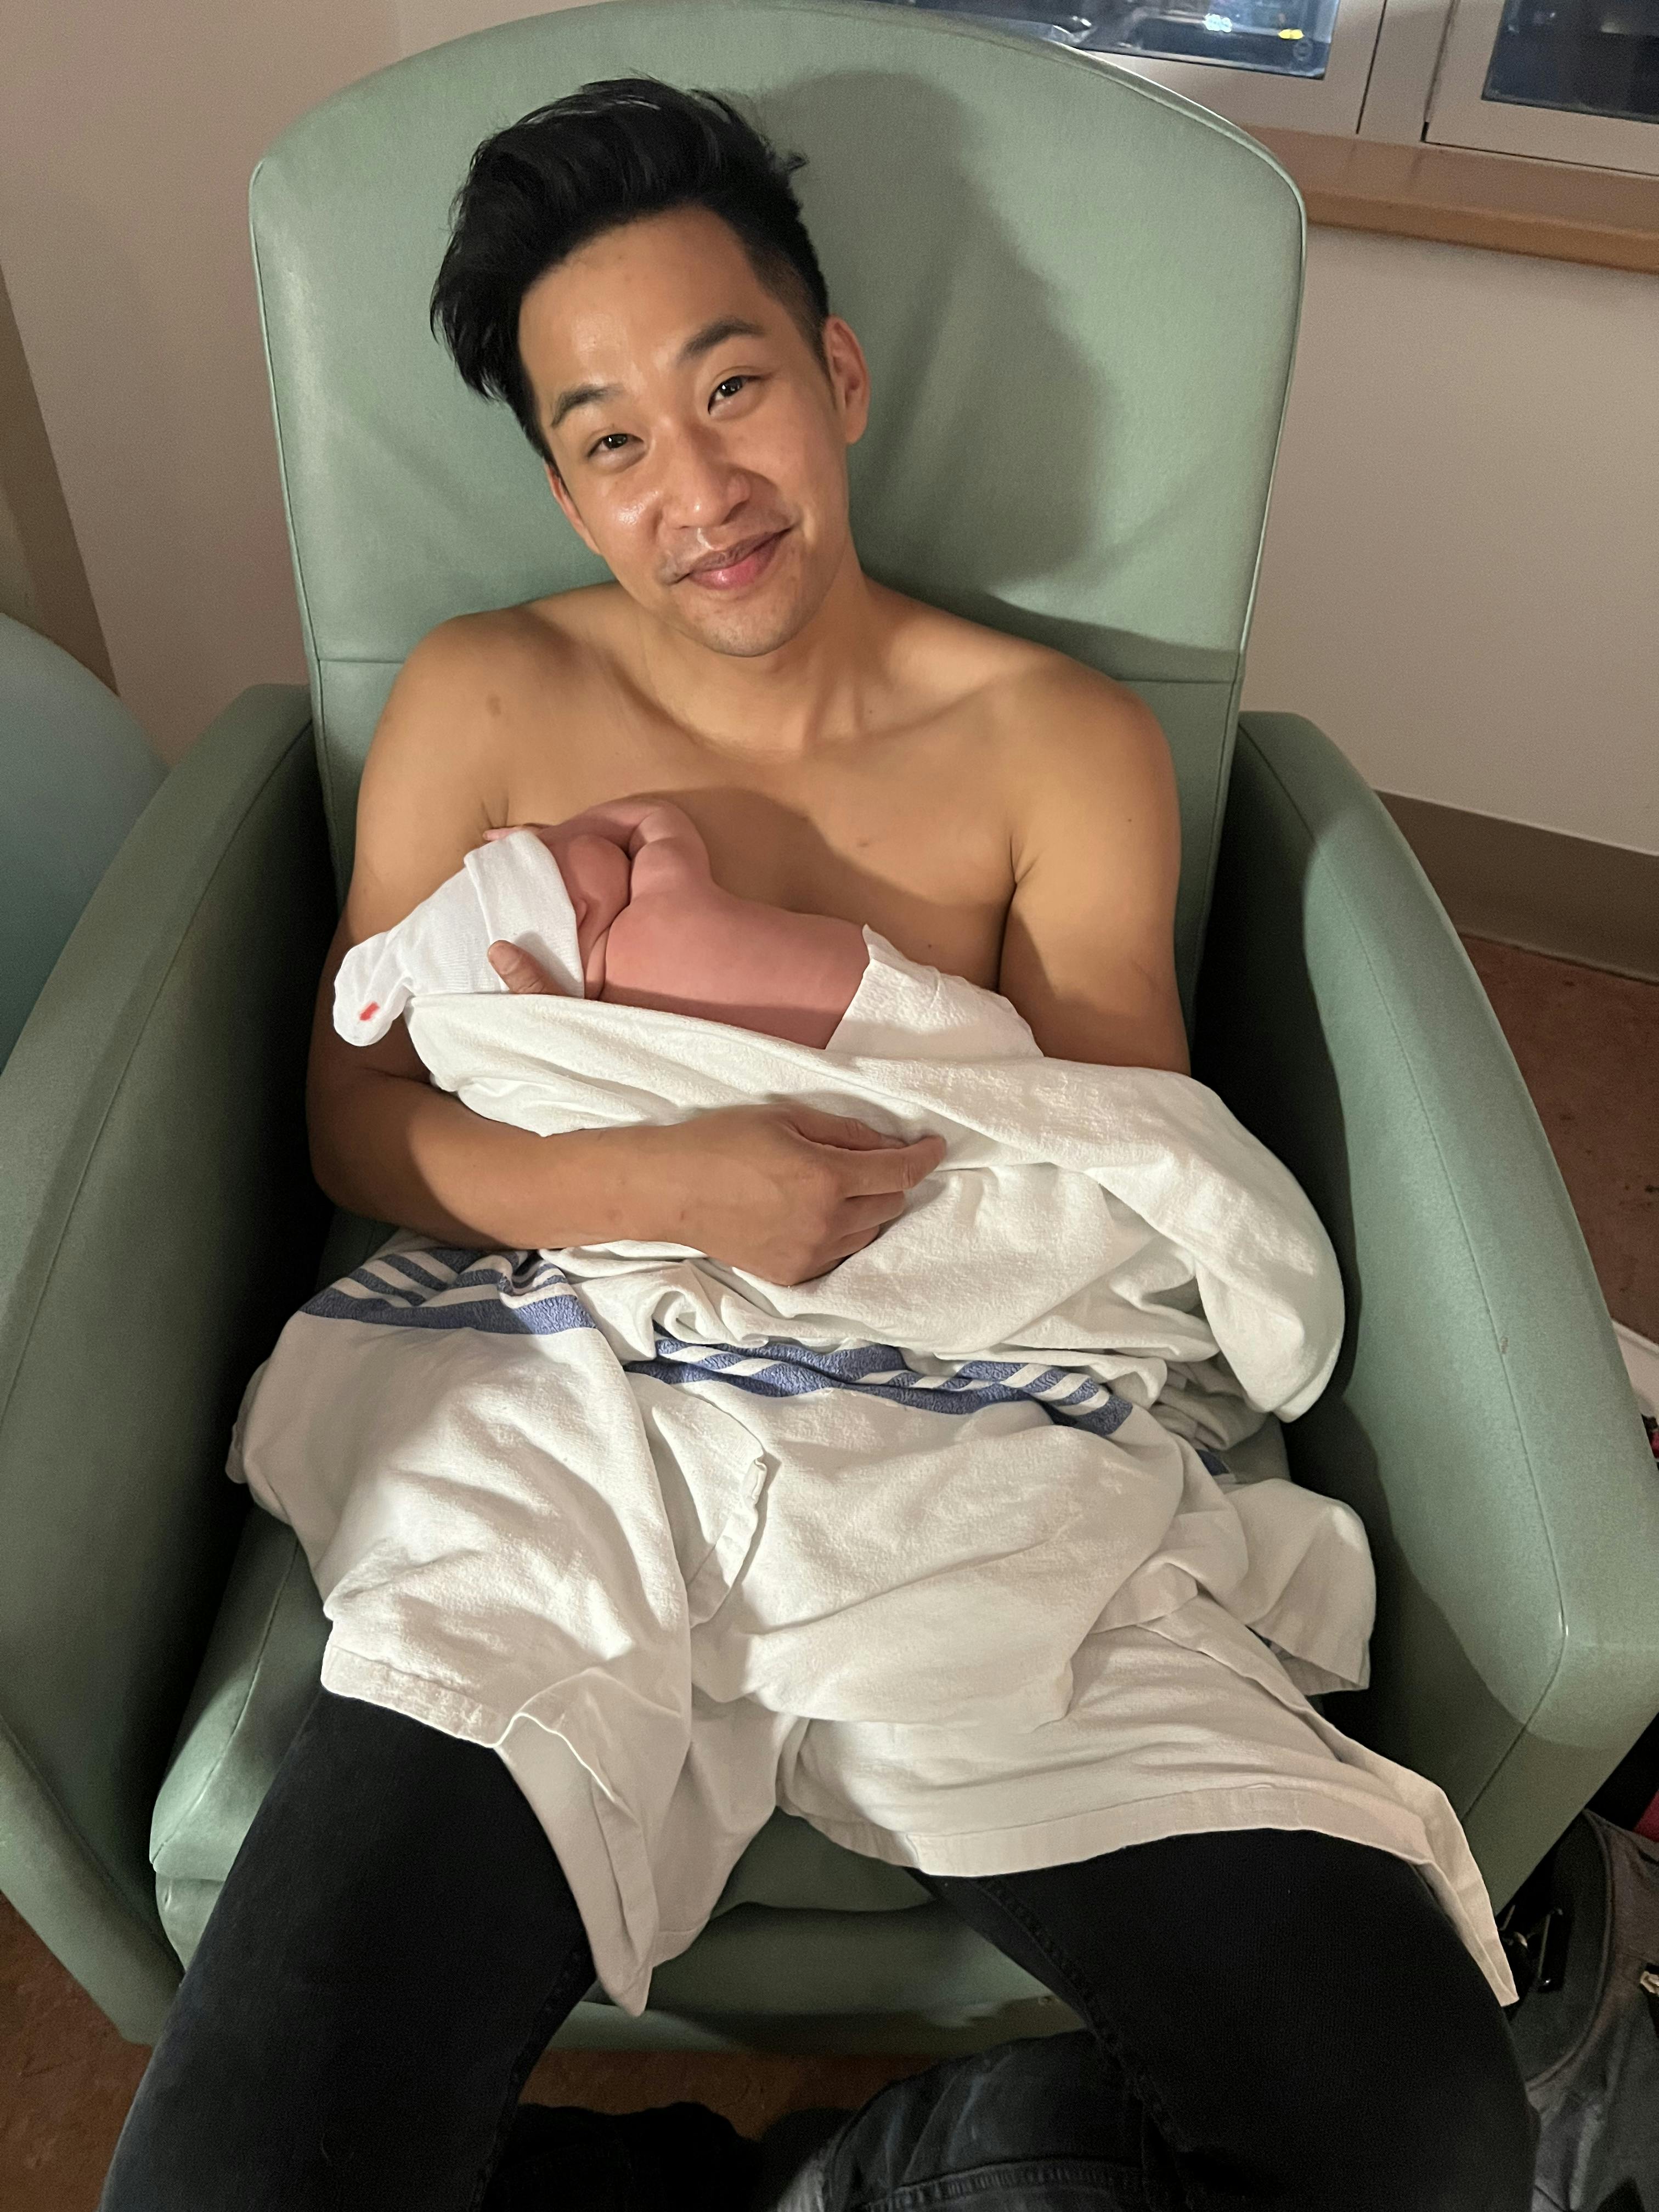 A shirtless Patrick Kwok-Choon holds his newborn baby against his chest